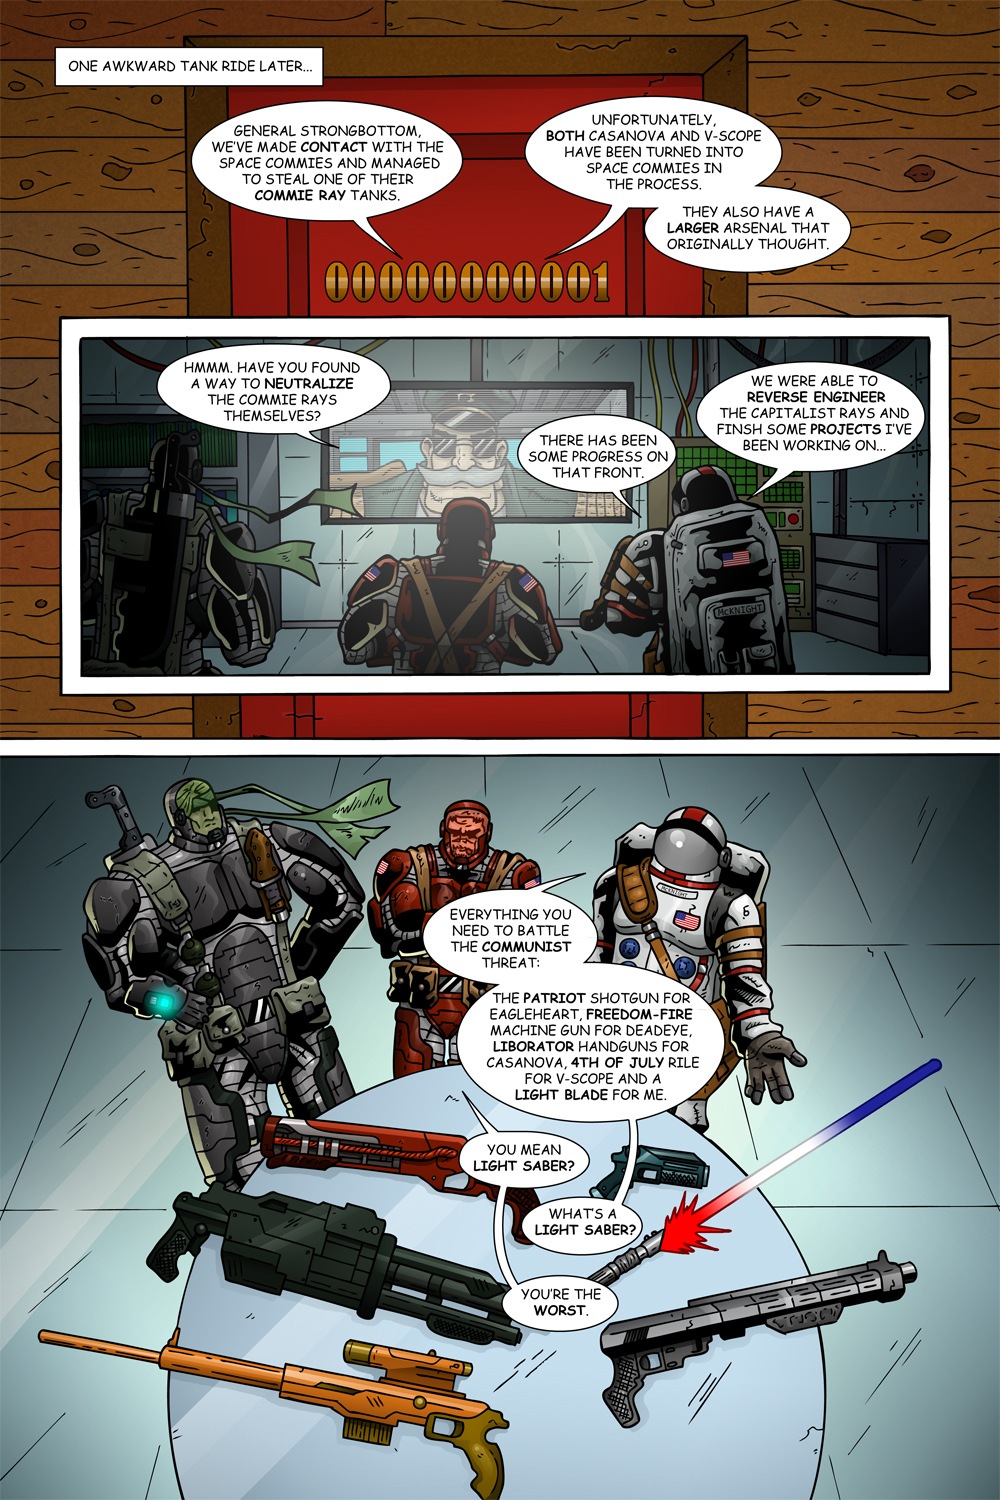 MISSION 007: PAGE 08 “YOU’RE THE WORST”